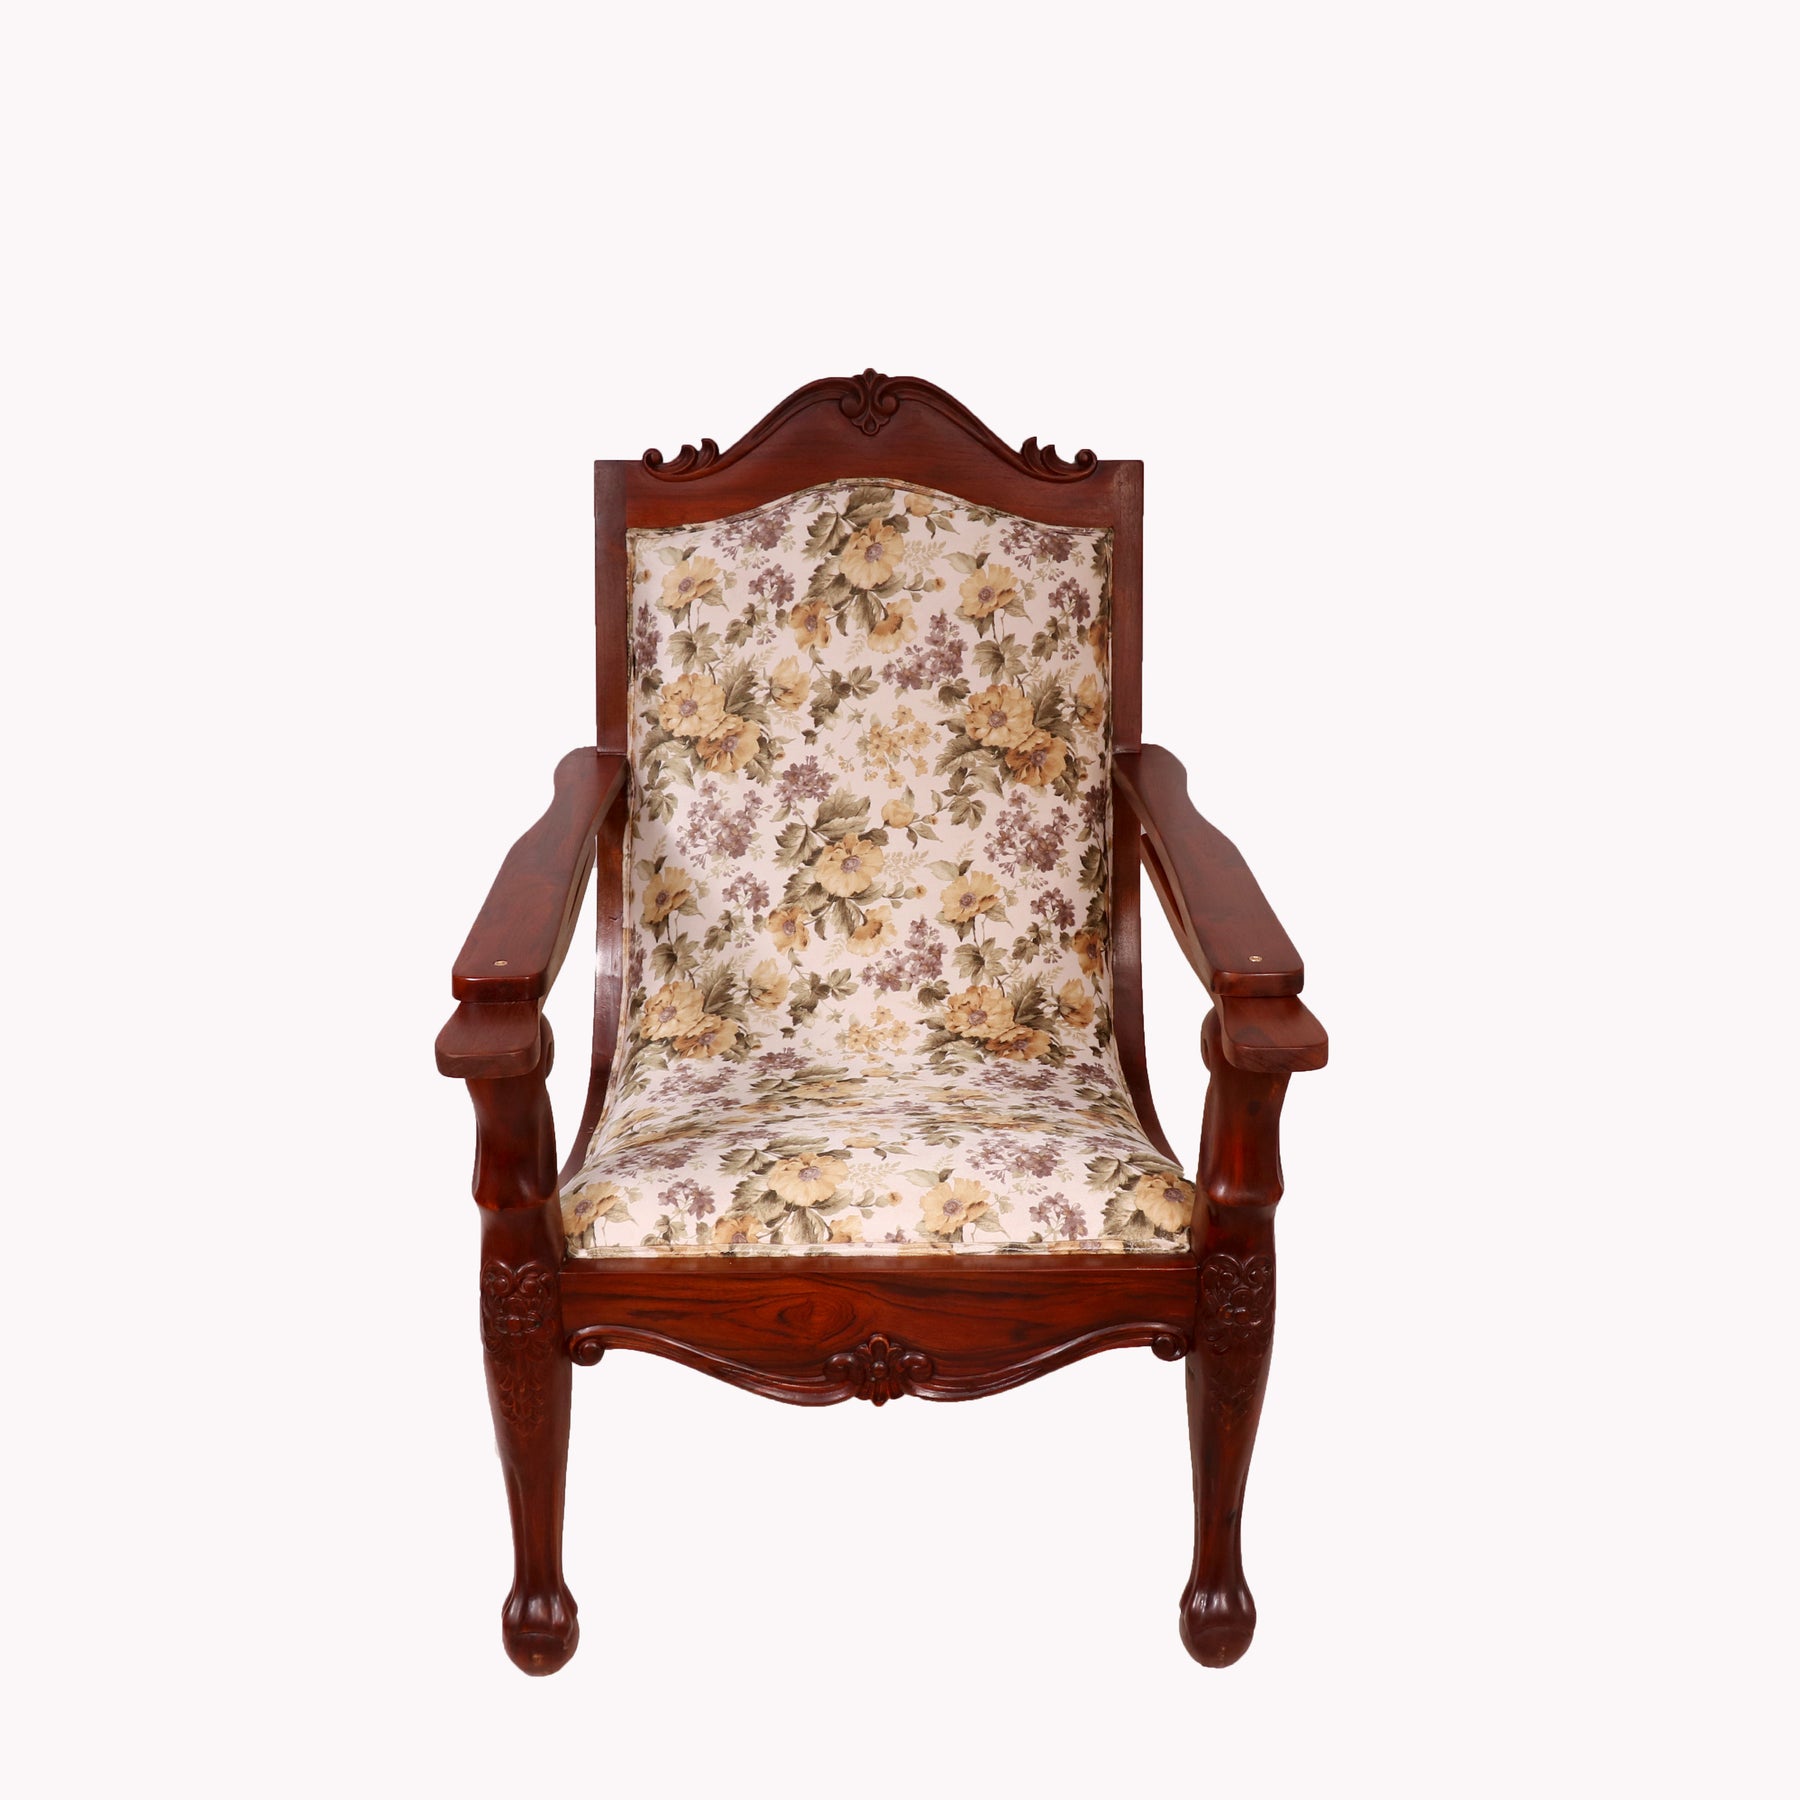 Upholstered Vintage Easy Chair